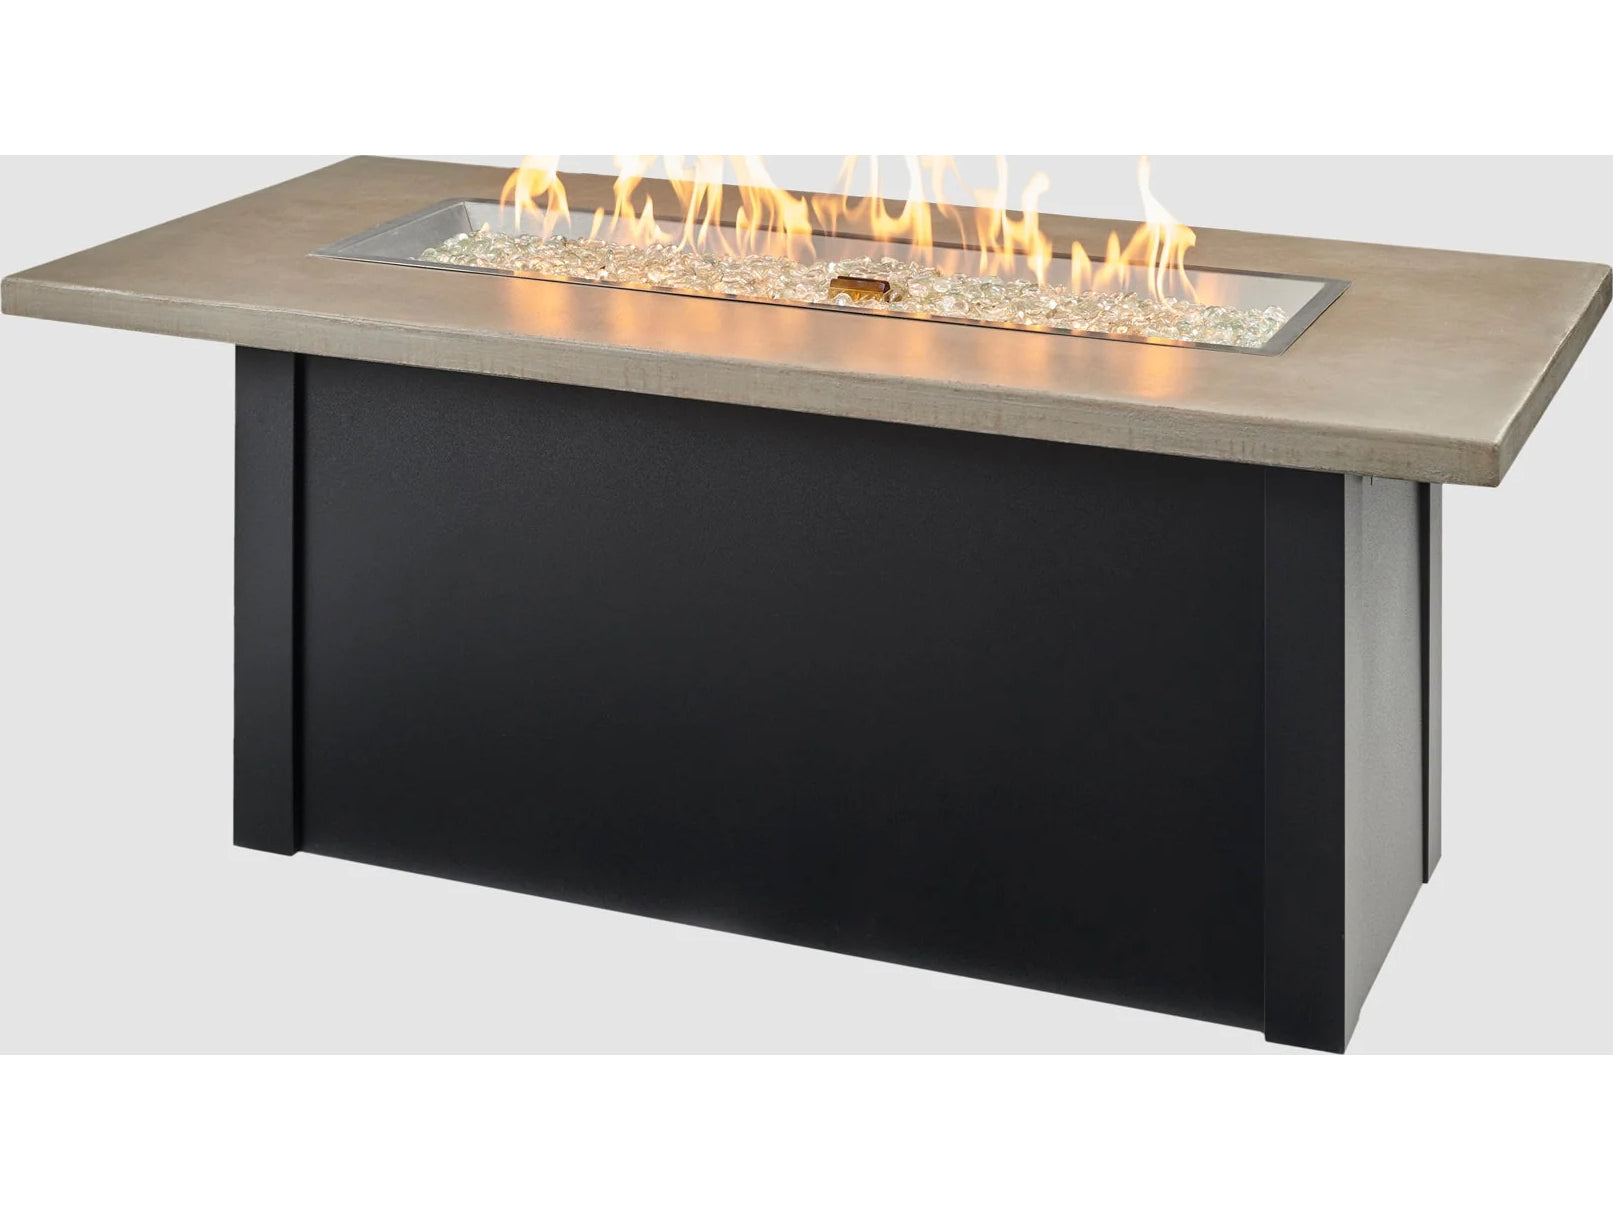 Outdoor Greatroom - 62’‘ Havenwood Steel Luverne Black Rectangular Pebble Grey Everblend Top Gas Fire Pit Table with Direct Spark Ignition